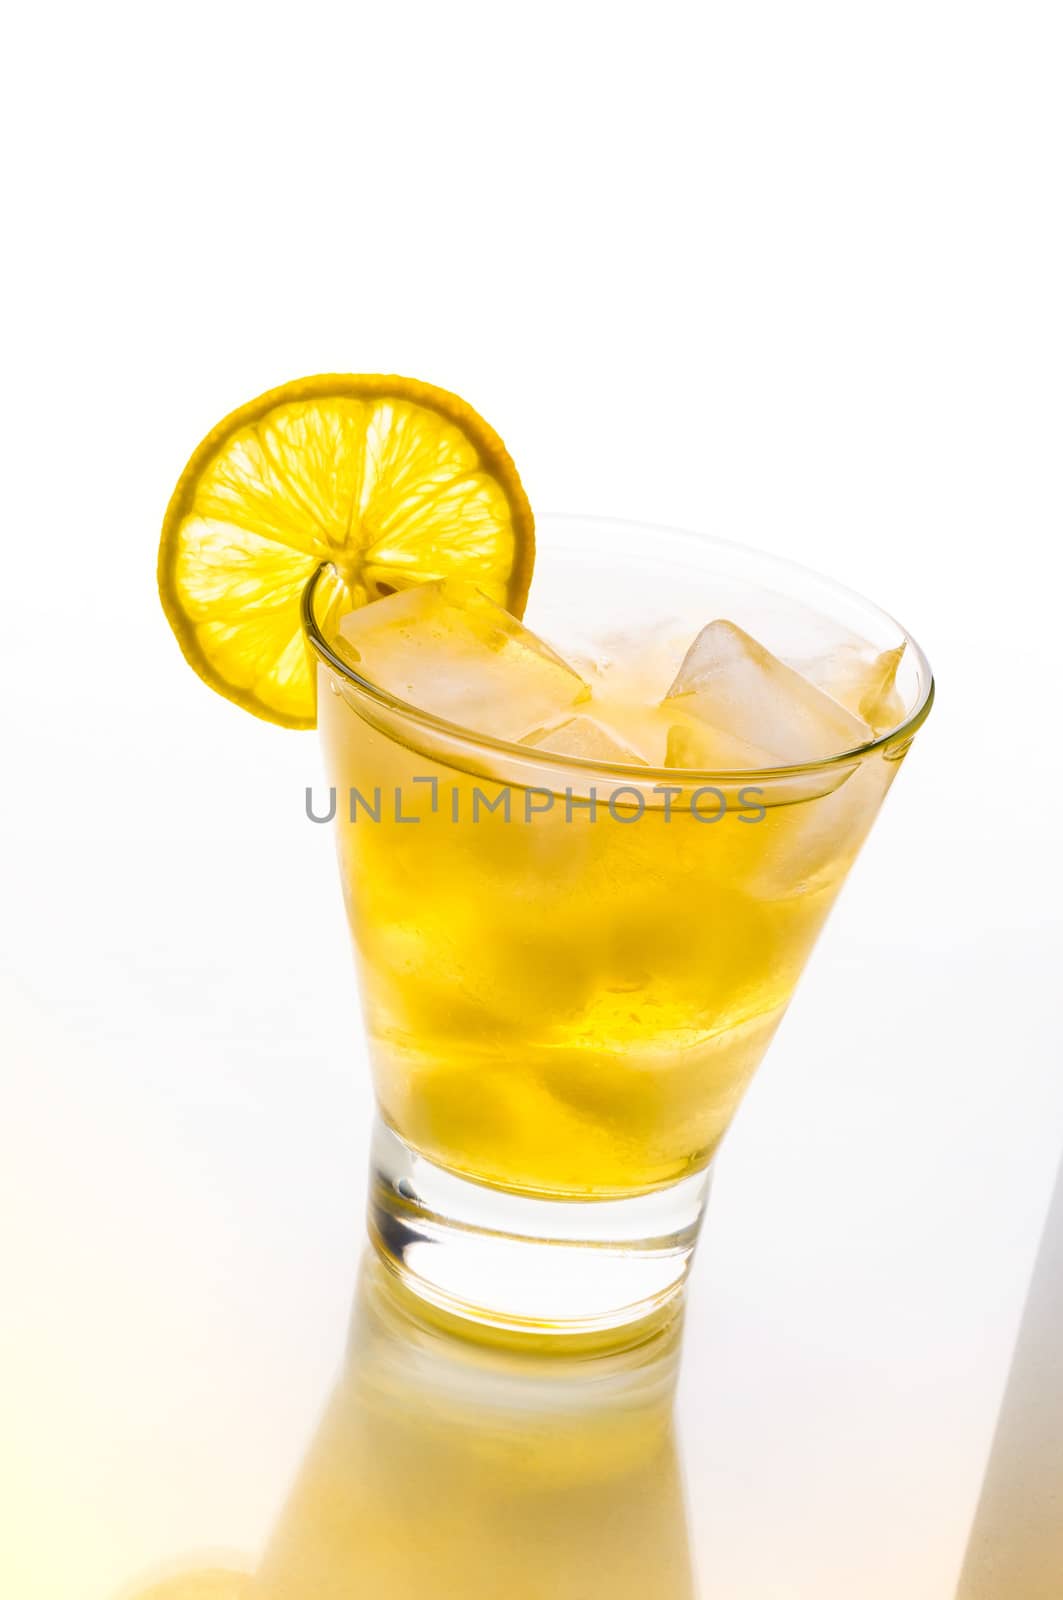 A fresh and tasty cocktail with alcohol and lemon on a glass table with yellow reflection